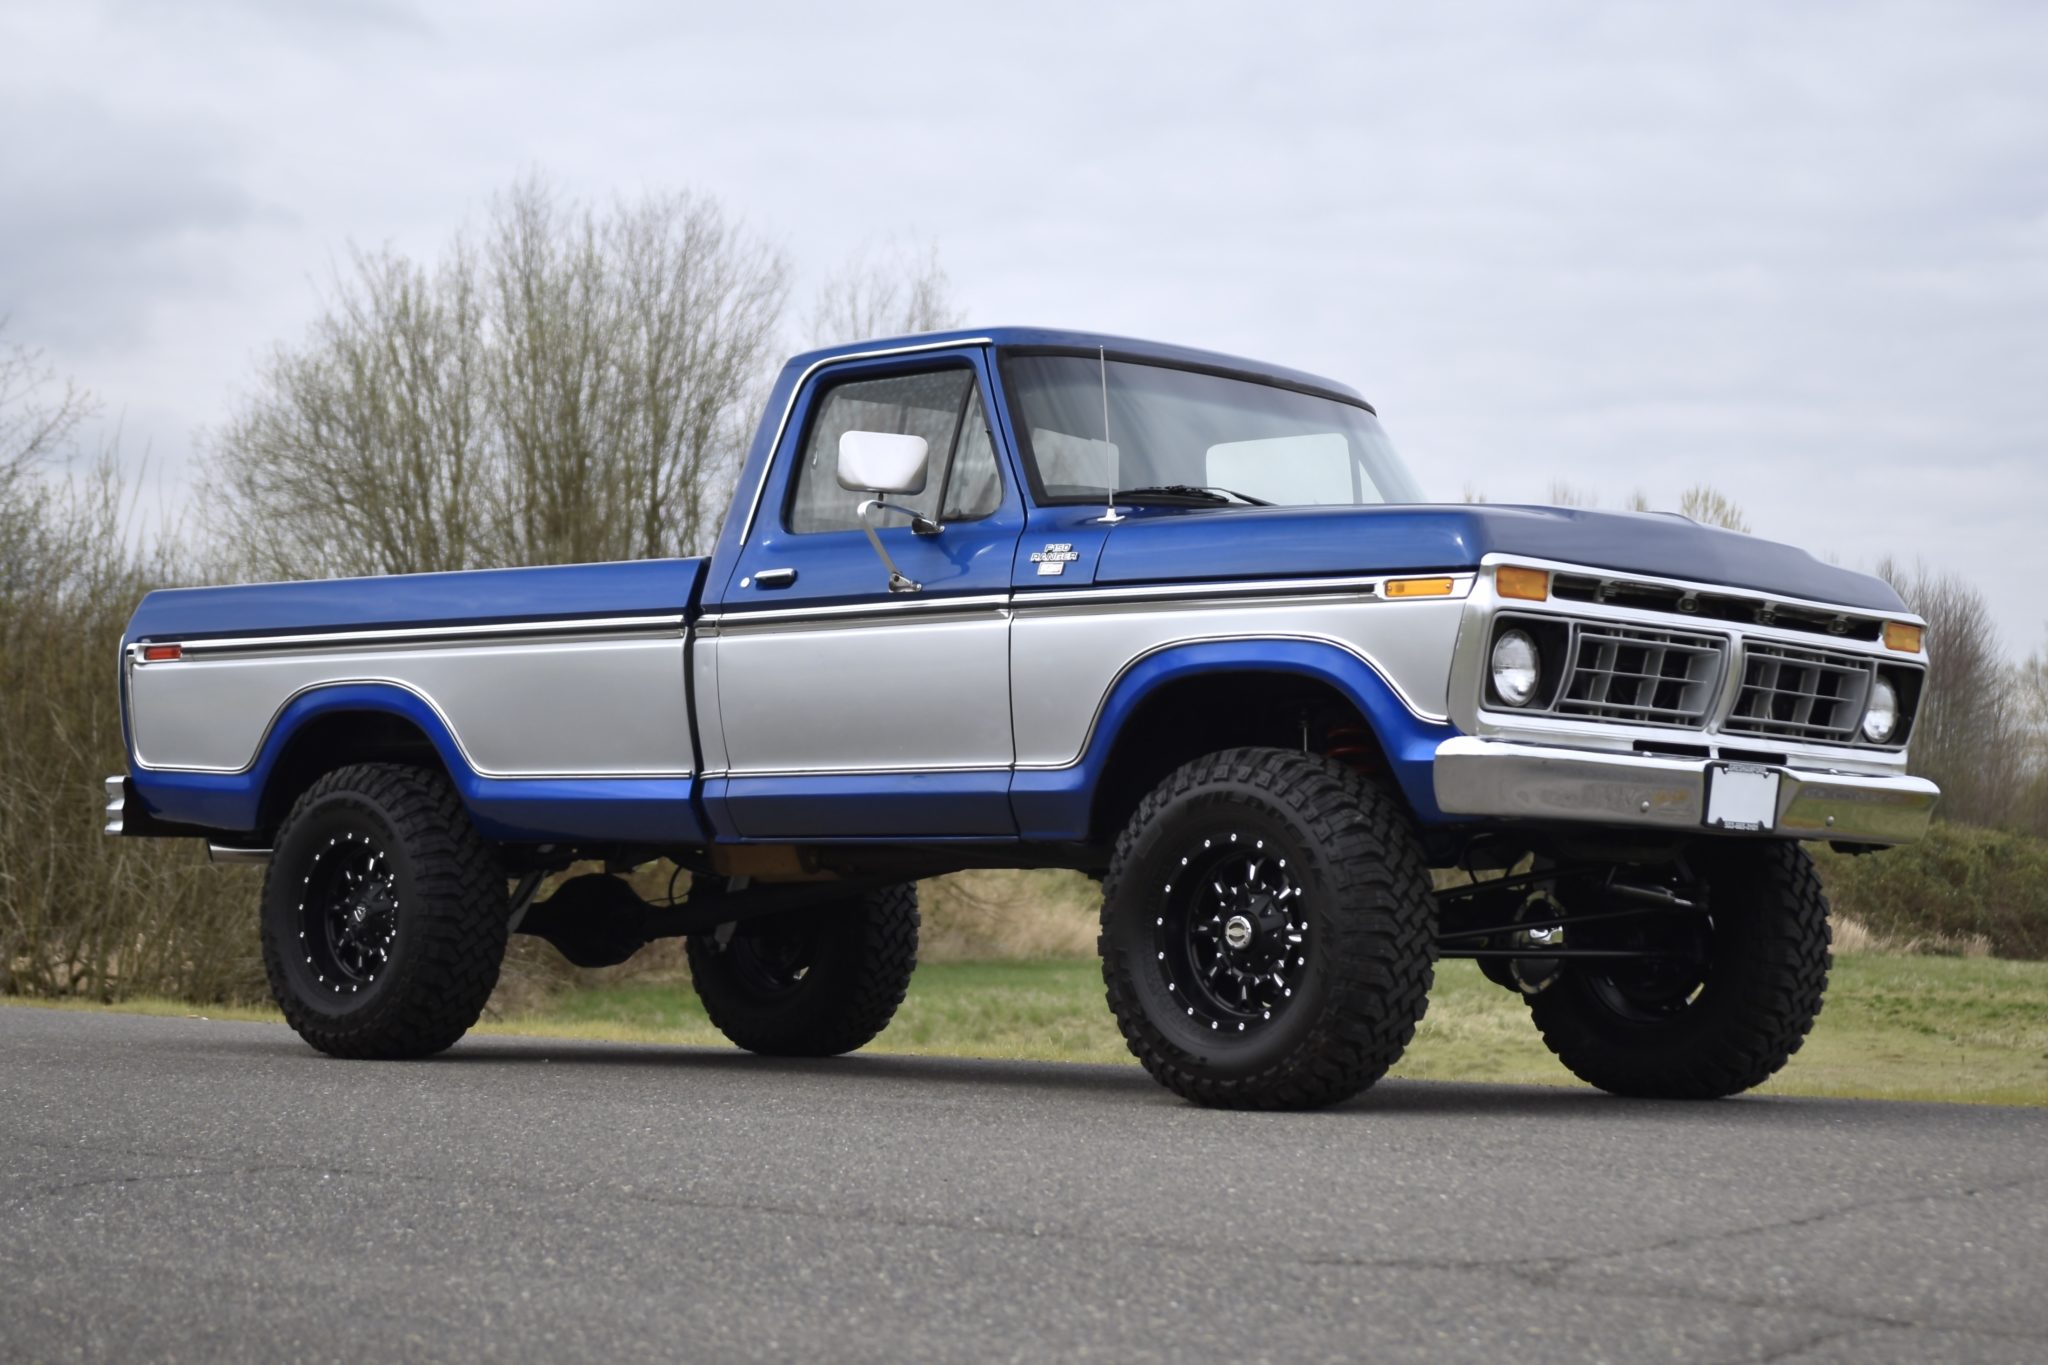 This 1977 Ford F-150 Ranger XLT Packs a Four-Barrel Carbureted 351